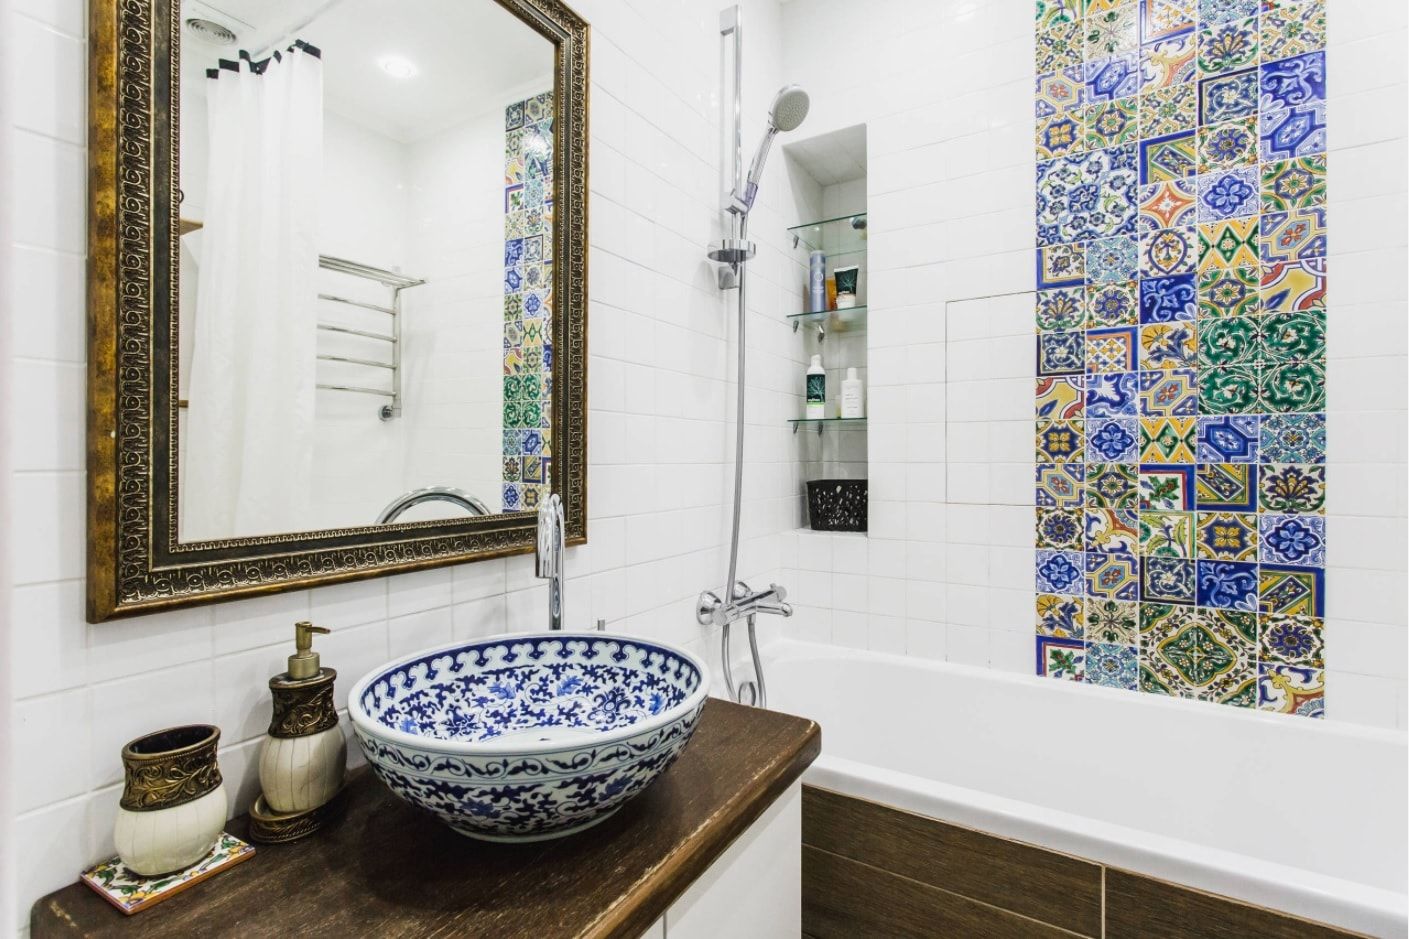 Painted blue sink and Zeinah mosaic tiles for accent in the bathroom